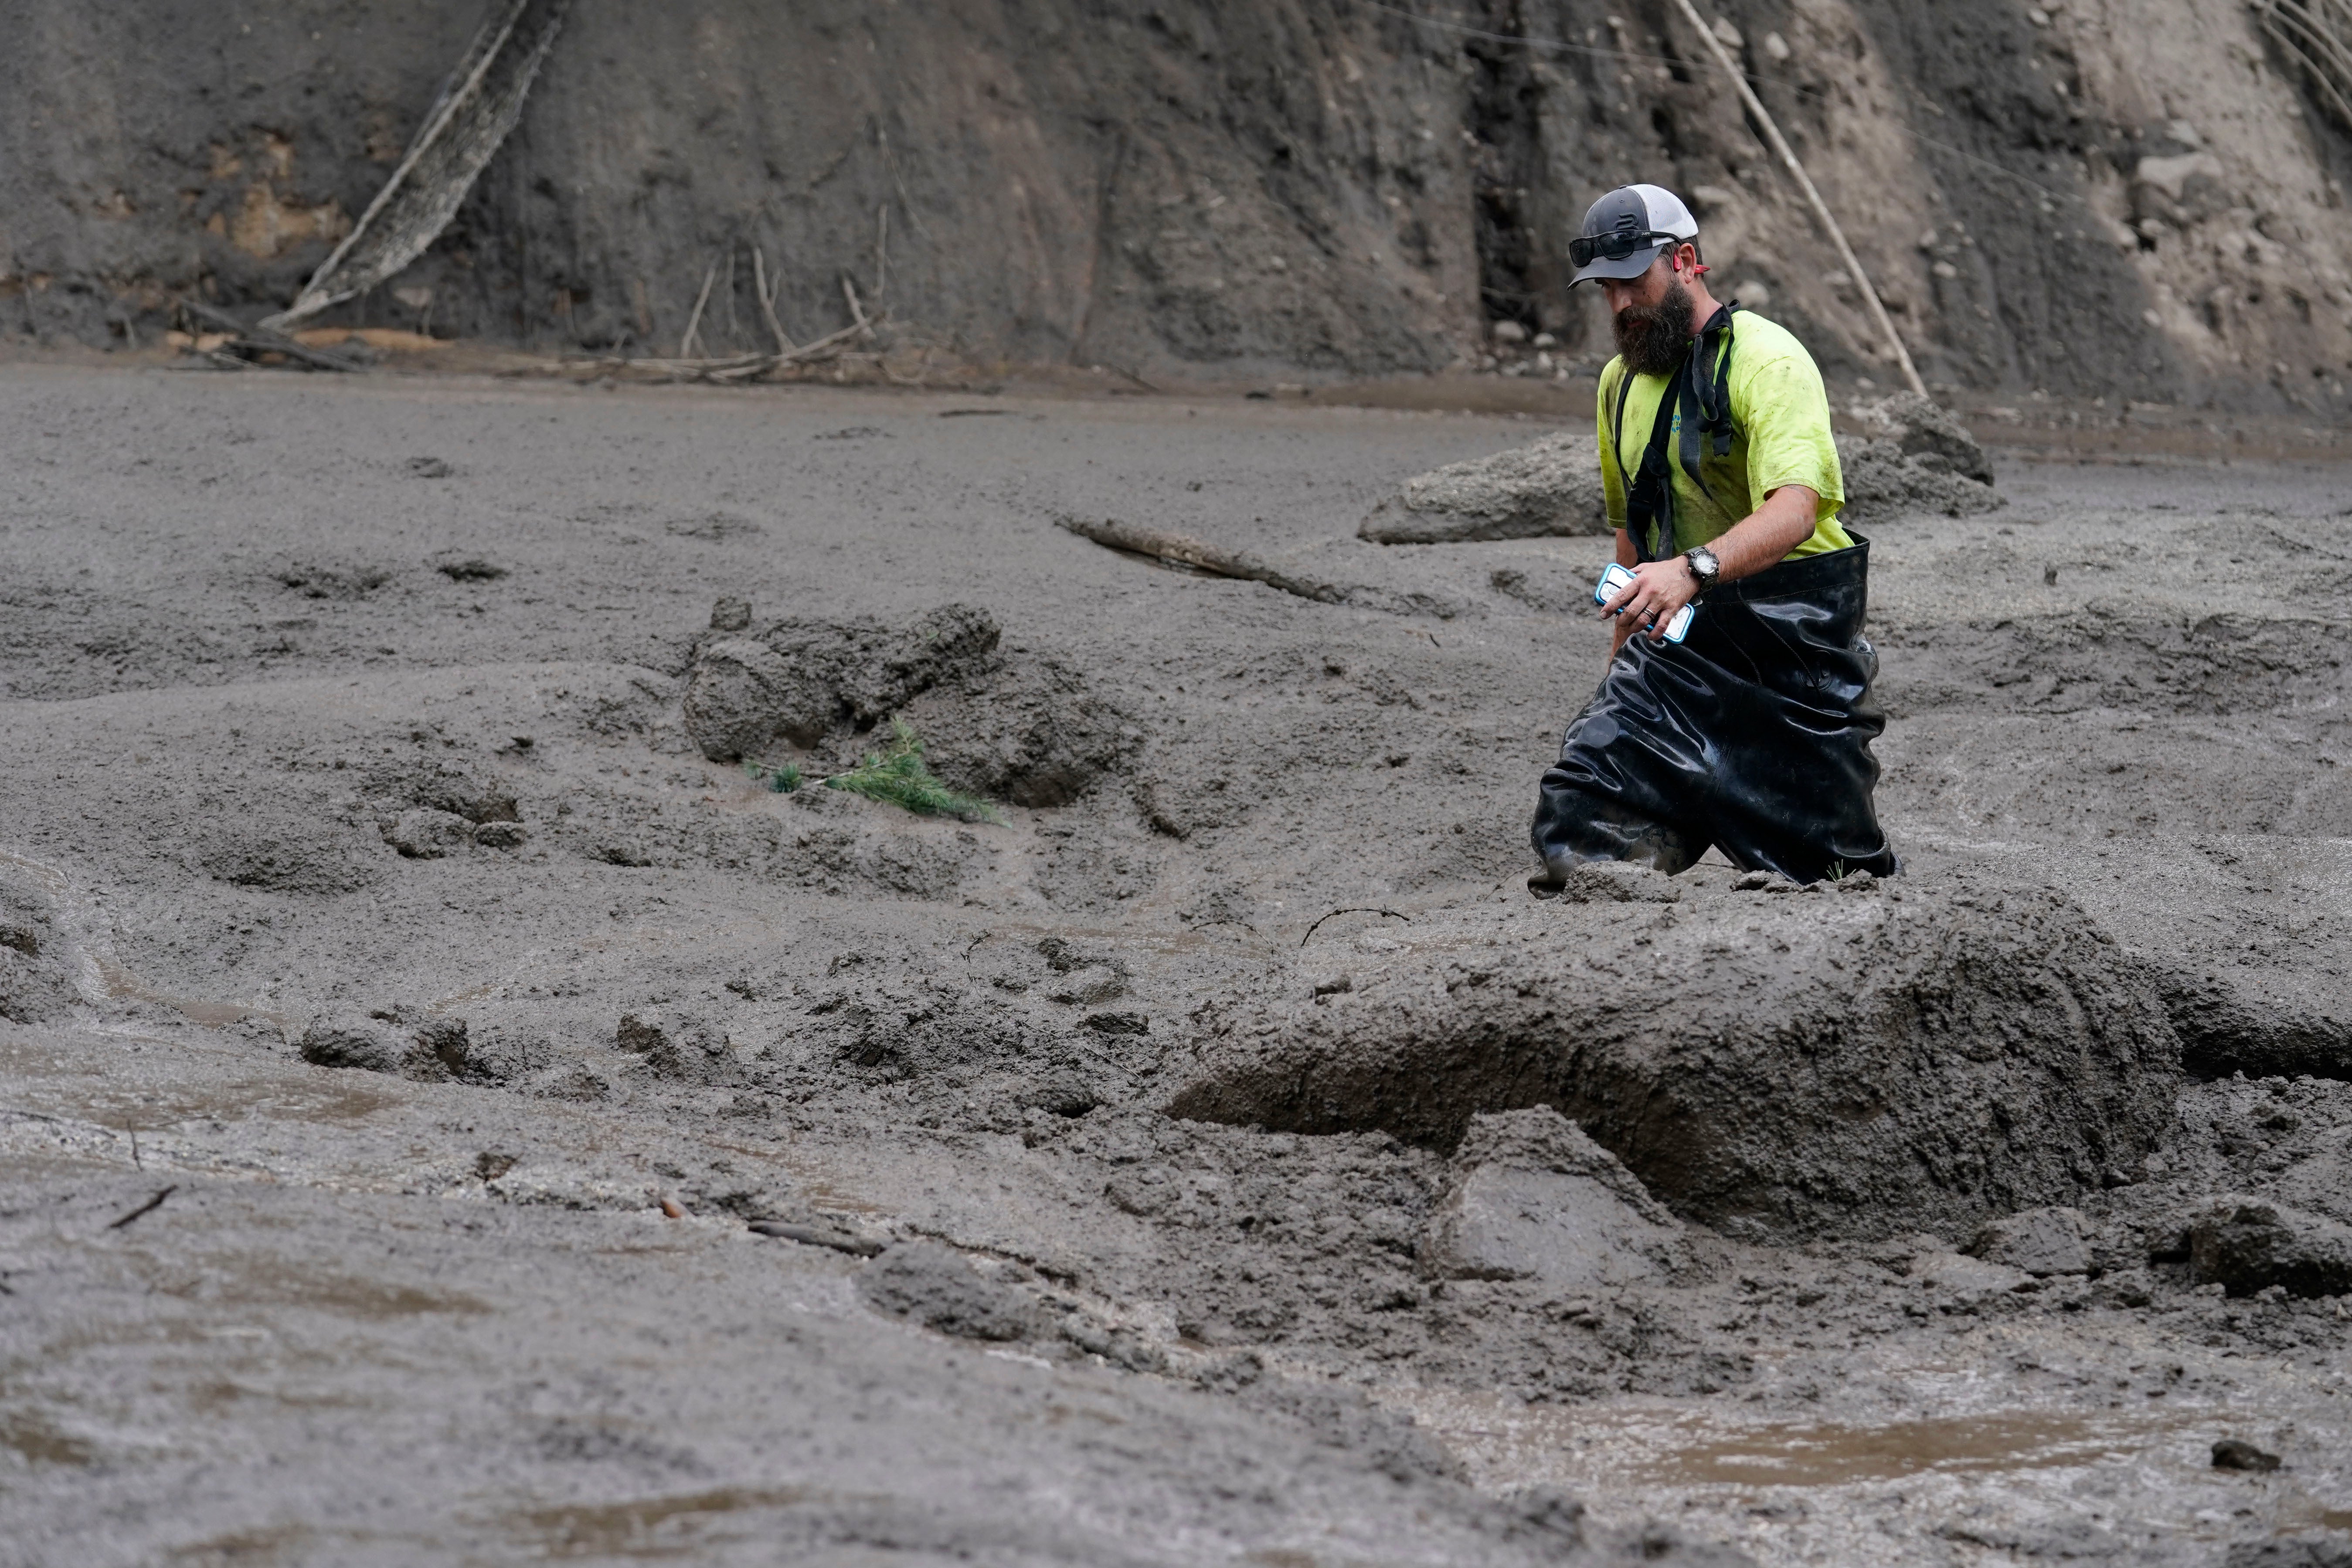 A worker with the Yucaipa Valley Water District threads through knee-deep mud while repairing a reservoir used as a drinking source in the aftermath of a mudslide, on Tuesday, Sept. 13, 2022, in Oak Glen, California.  (Photo: Marcio Jose Sanchez, AP)